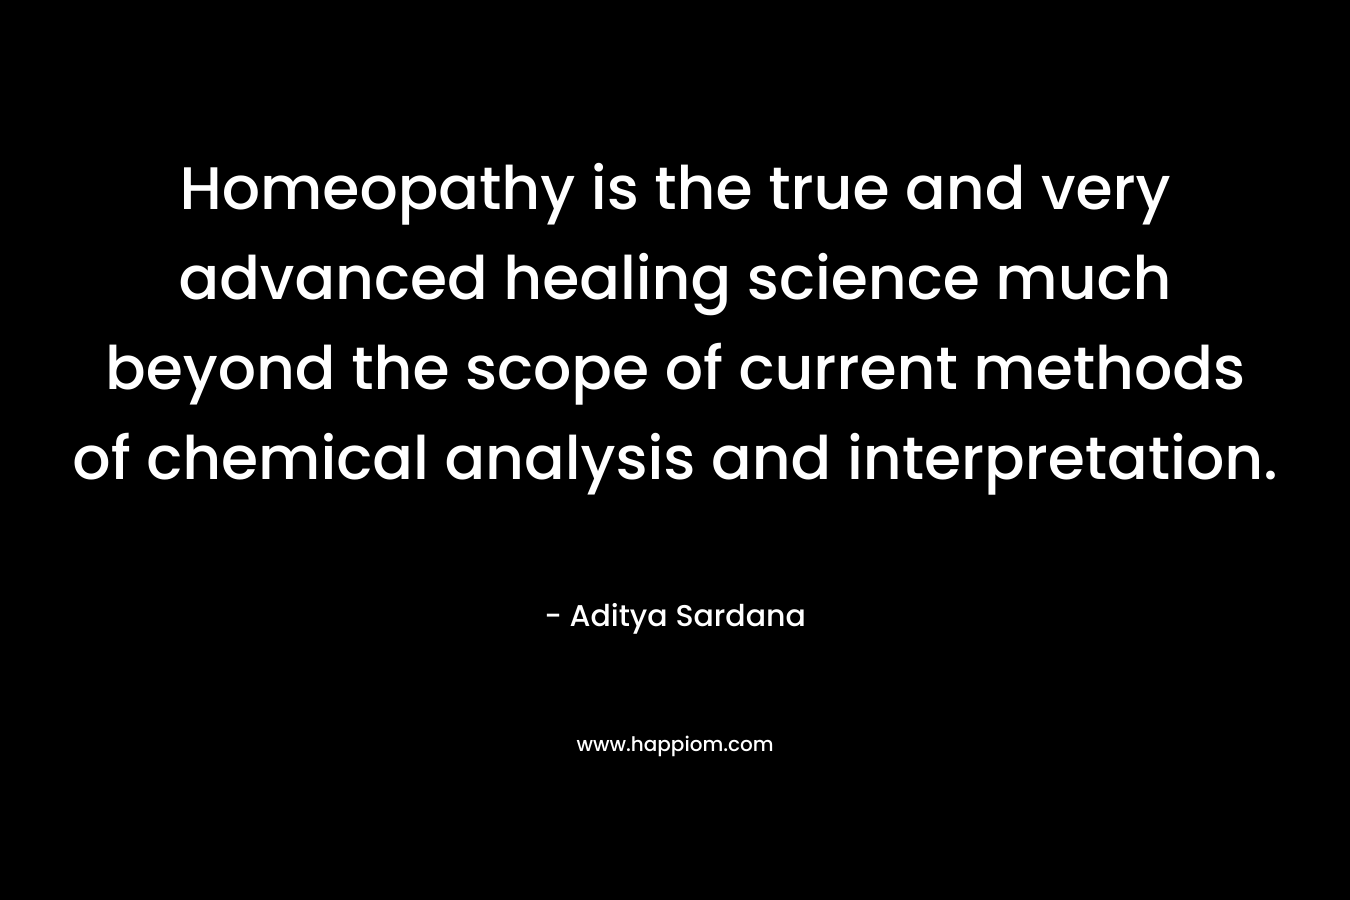 Homeopathy is the true and very advanced healing science much beyond the scope of current methods of chemical analysis and interpretation.